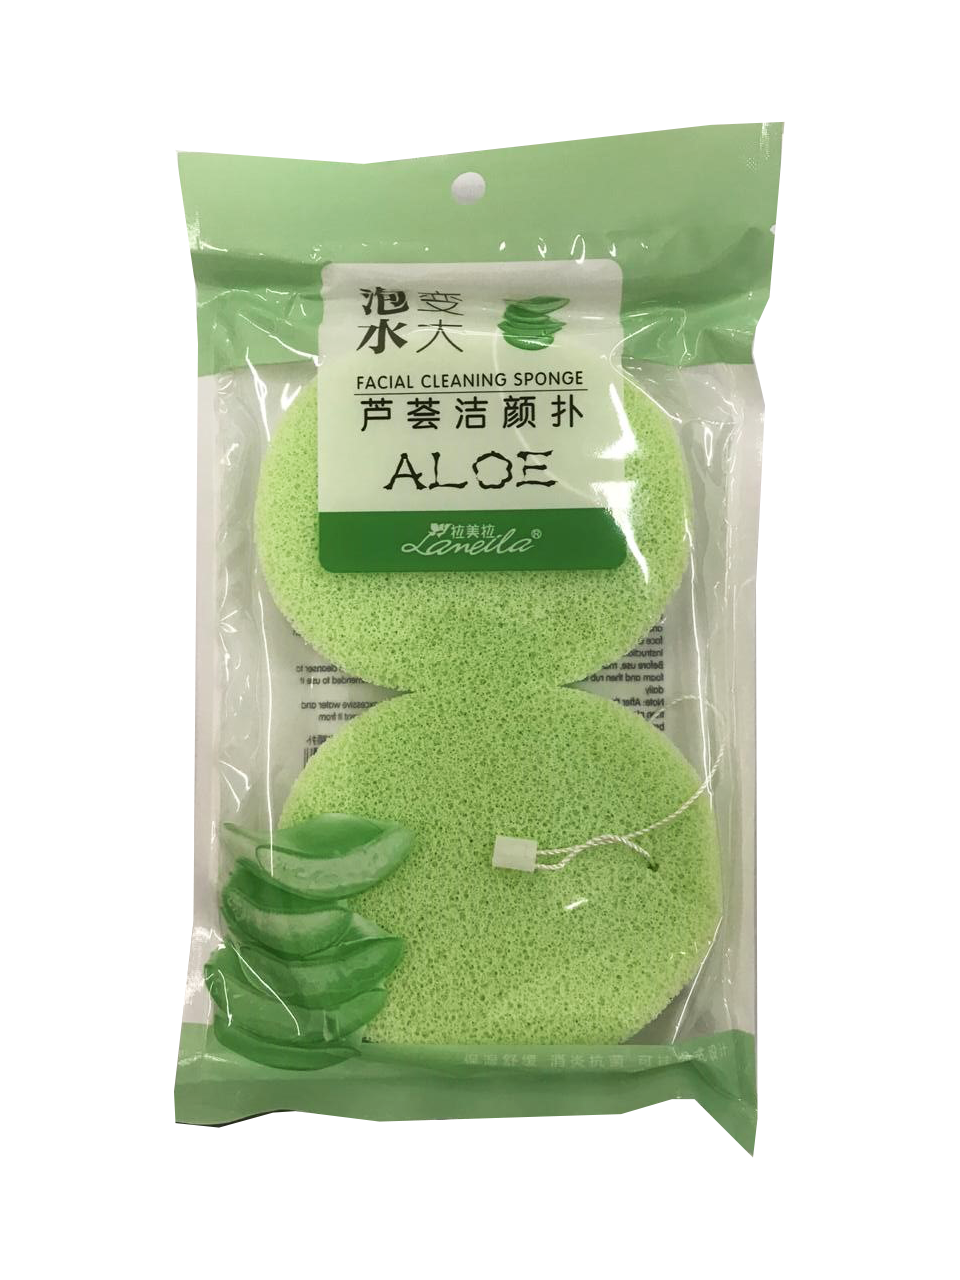 Facial Cleaning Sponge